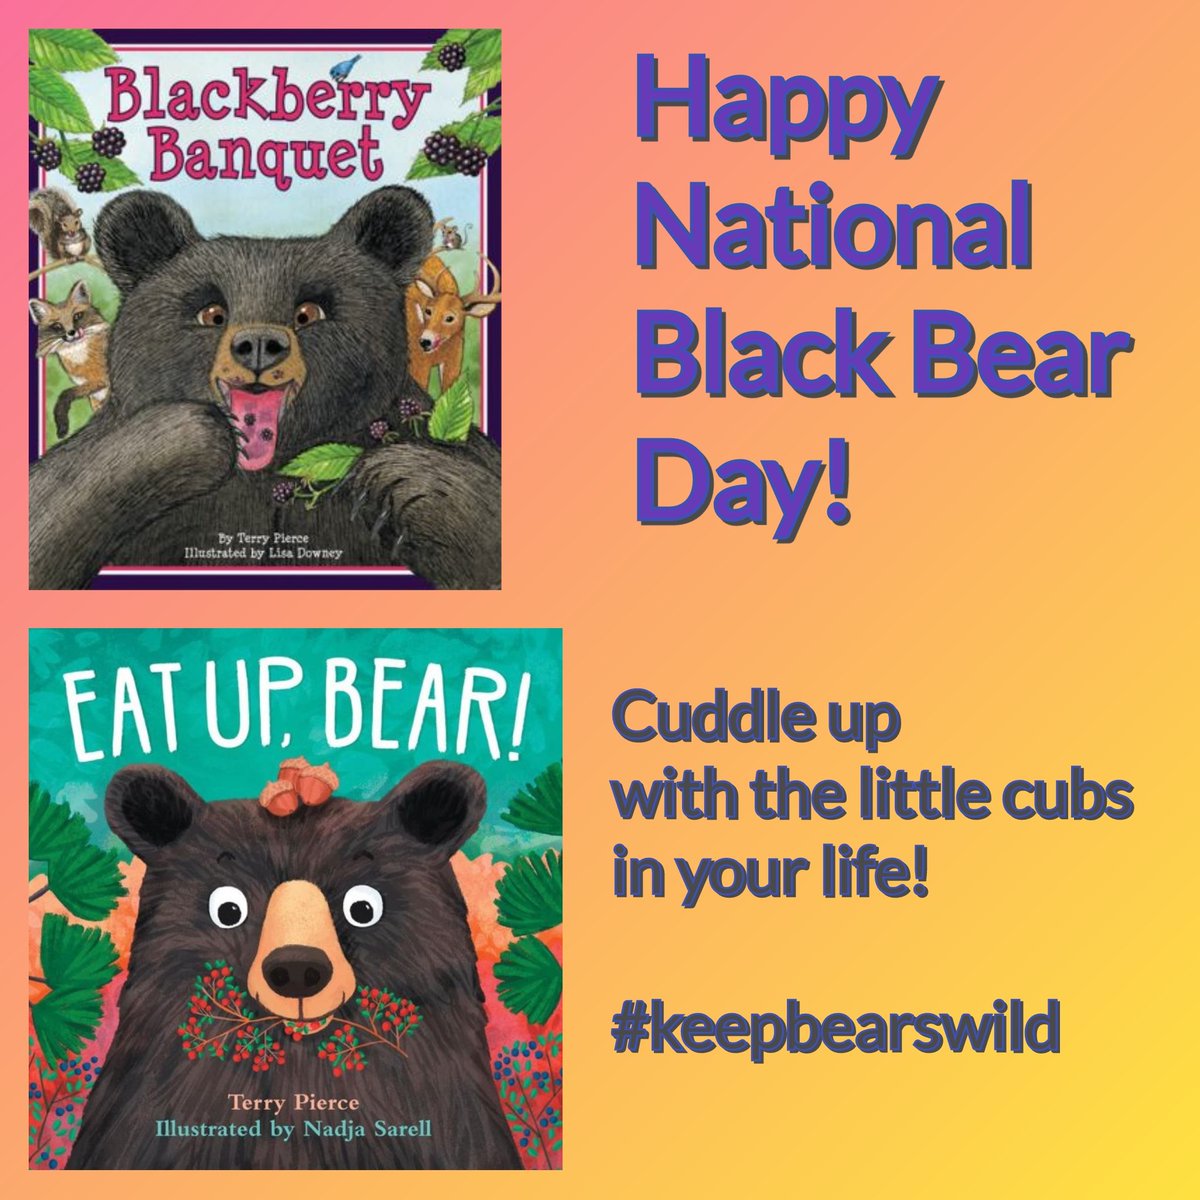 Happy National Black Bear Day! Let's do our part to help keep these beautiful creatures safe and wild. 🐻🐻🐻 #nationalblackbearday #keepbearswild